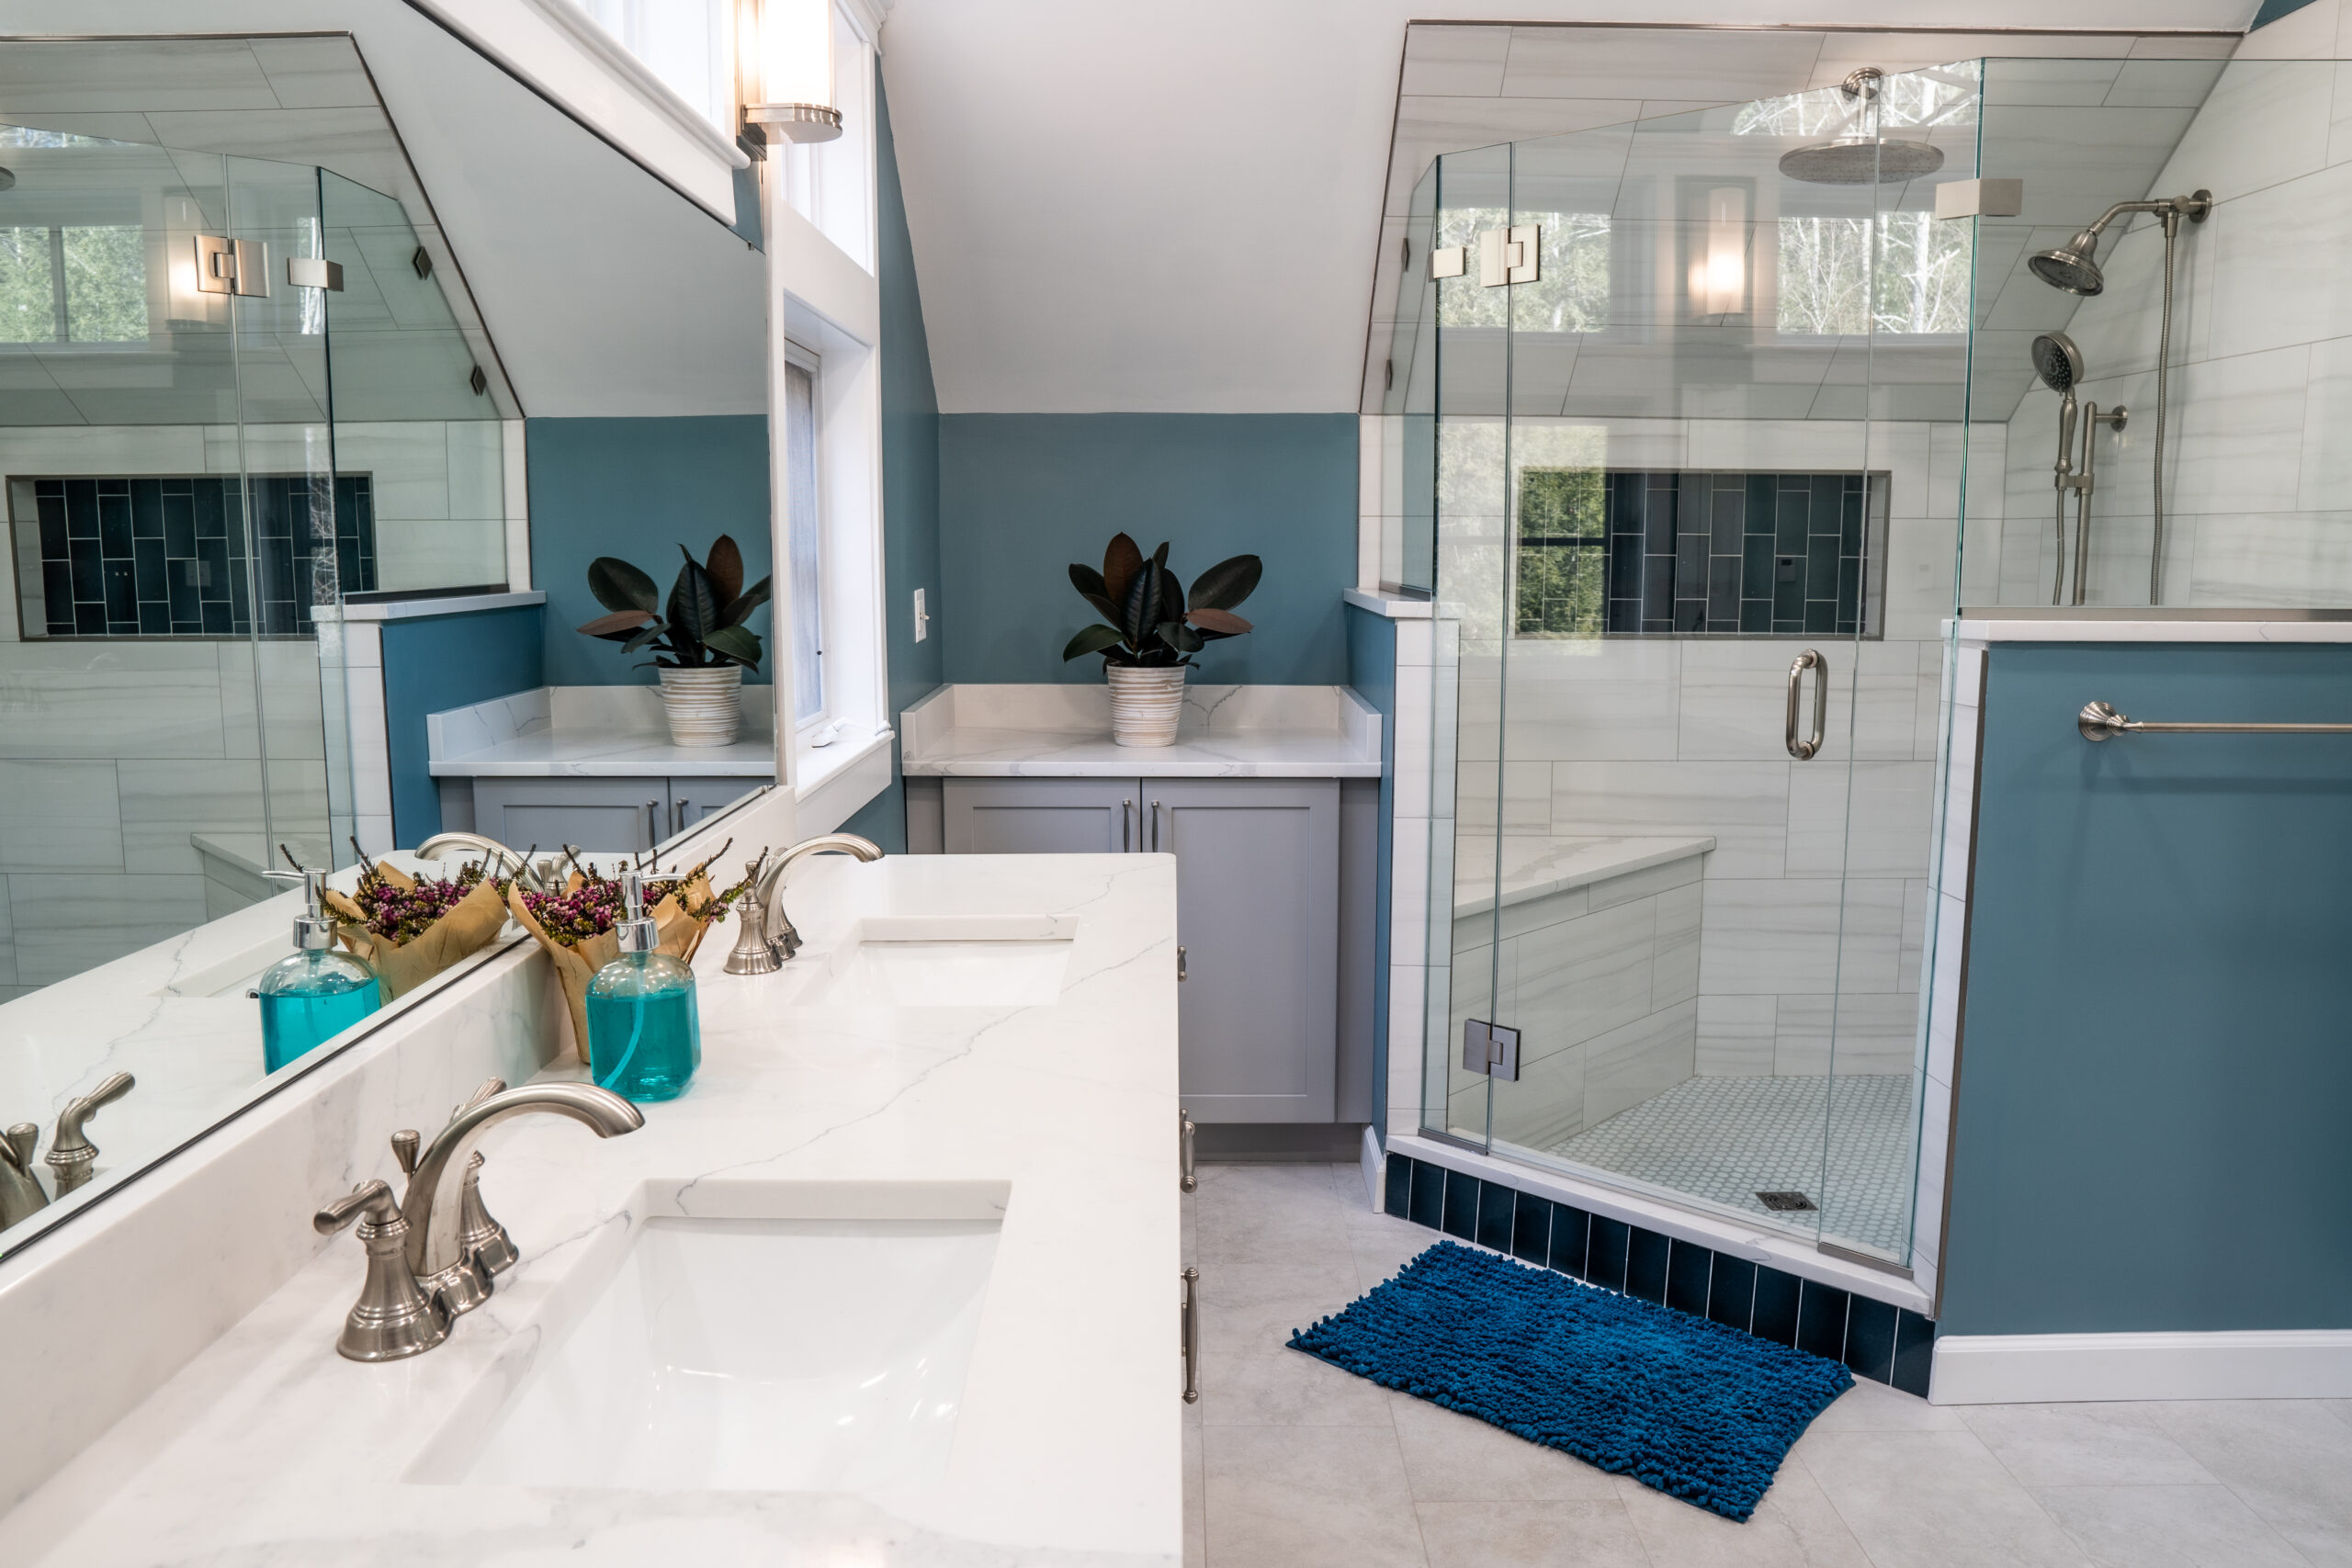 Bedford, NH – Bright and Airy Master Bathroom